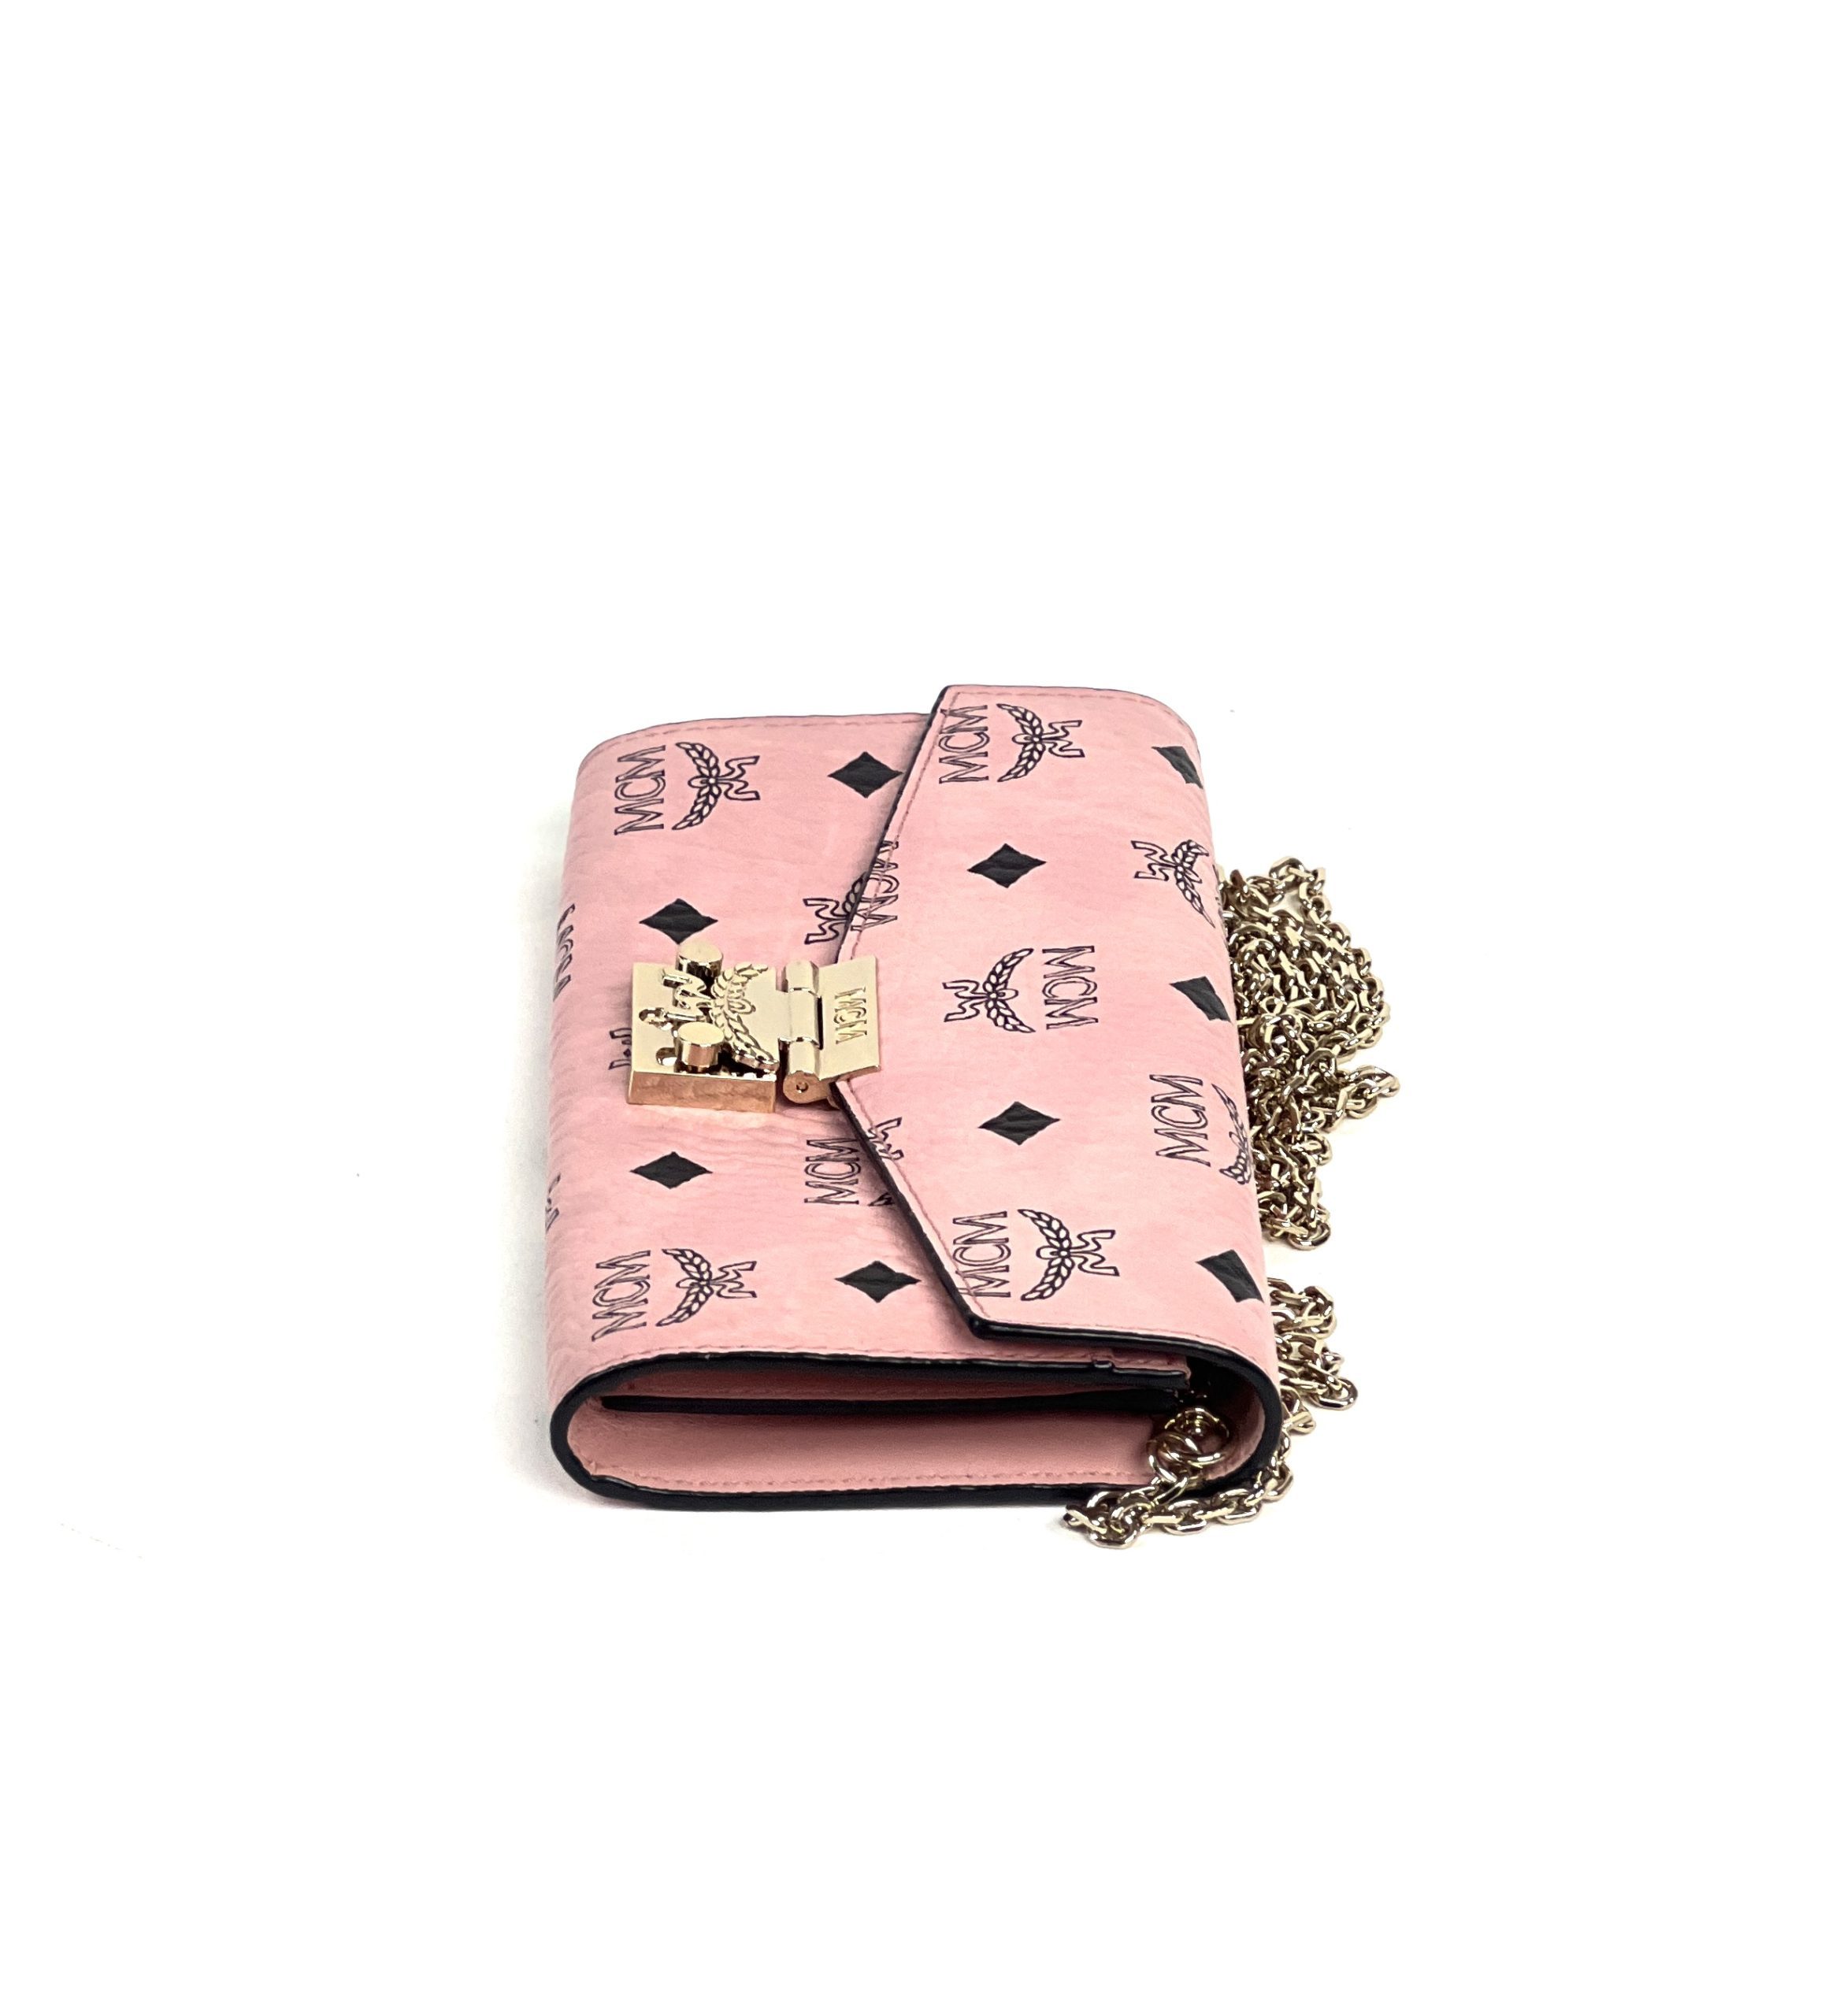 MCM Wallet on a Chain Pink Crossbody Bag